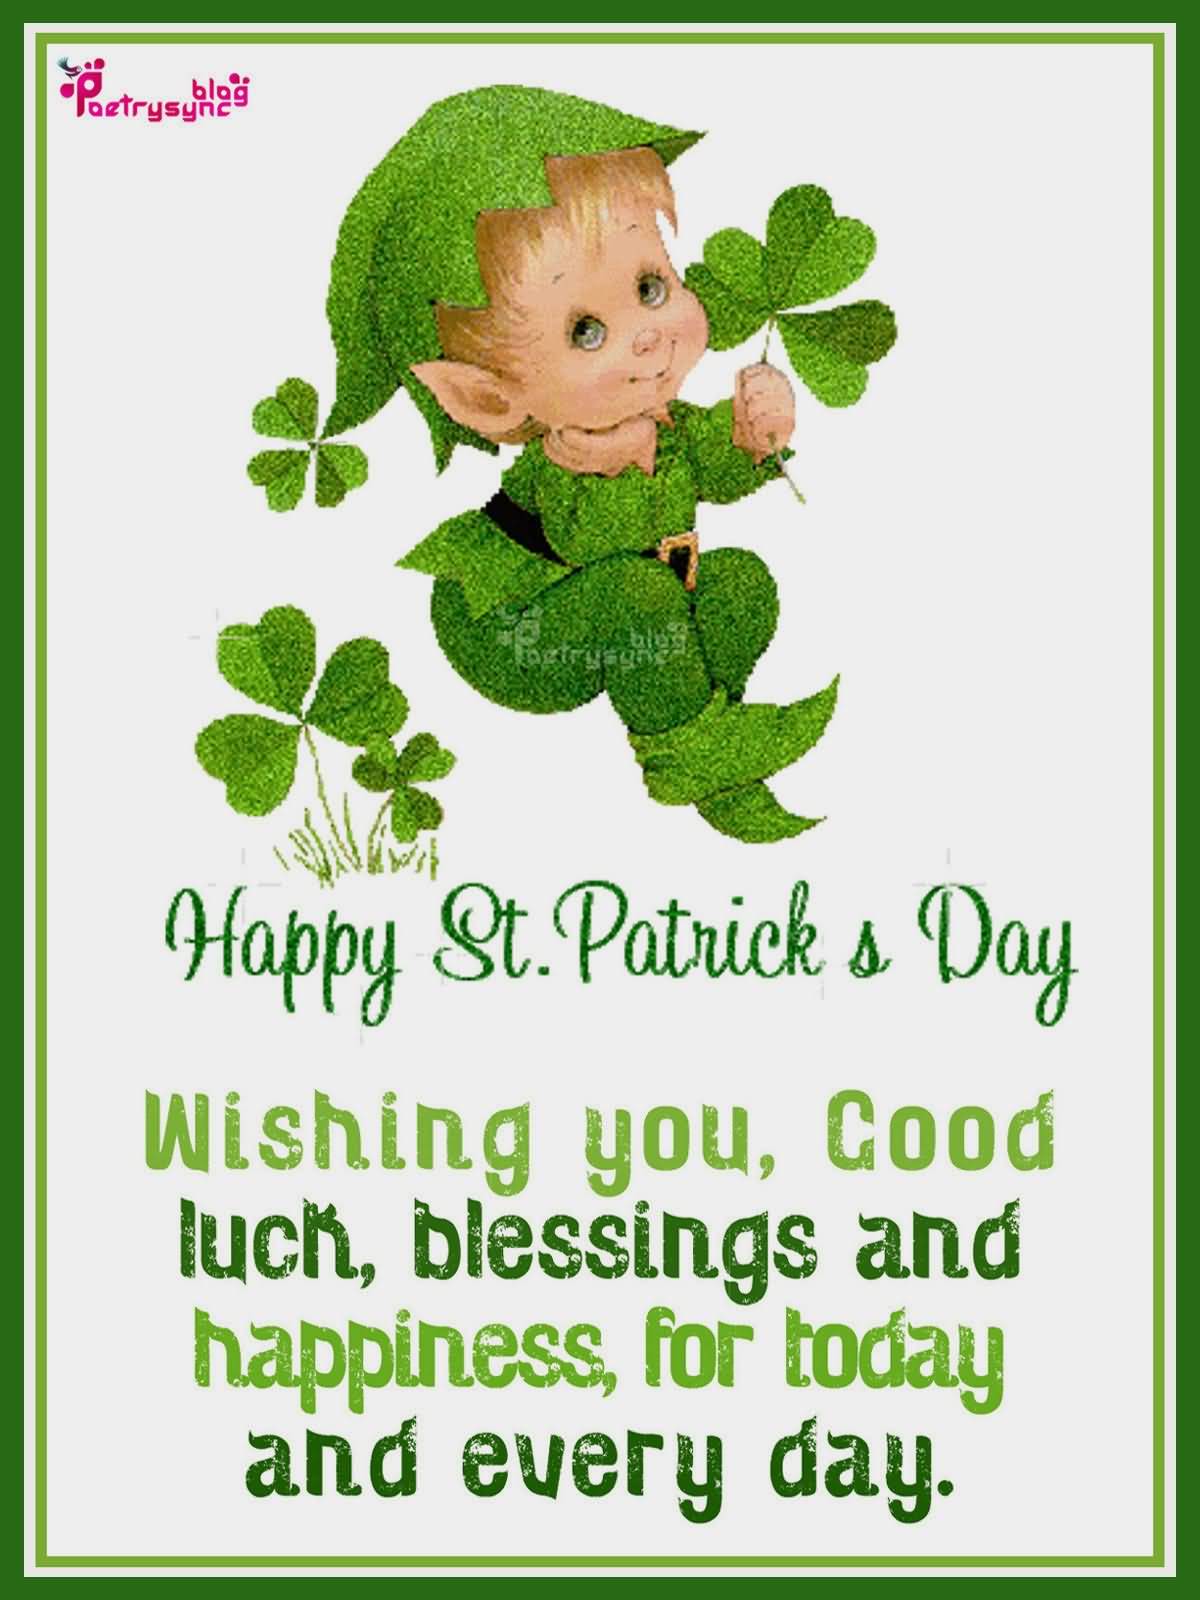 Happy Saint Patrick's Day Wishing You Good Luck, Blessings And Happiness For Today And Every Day